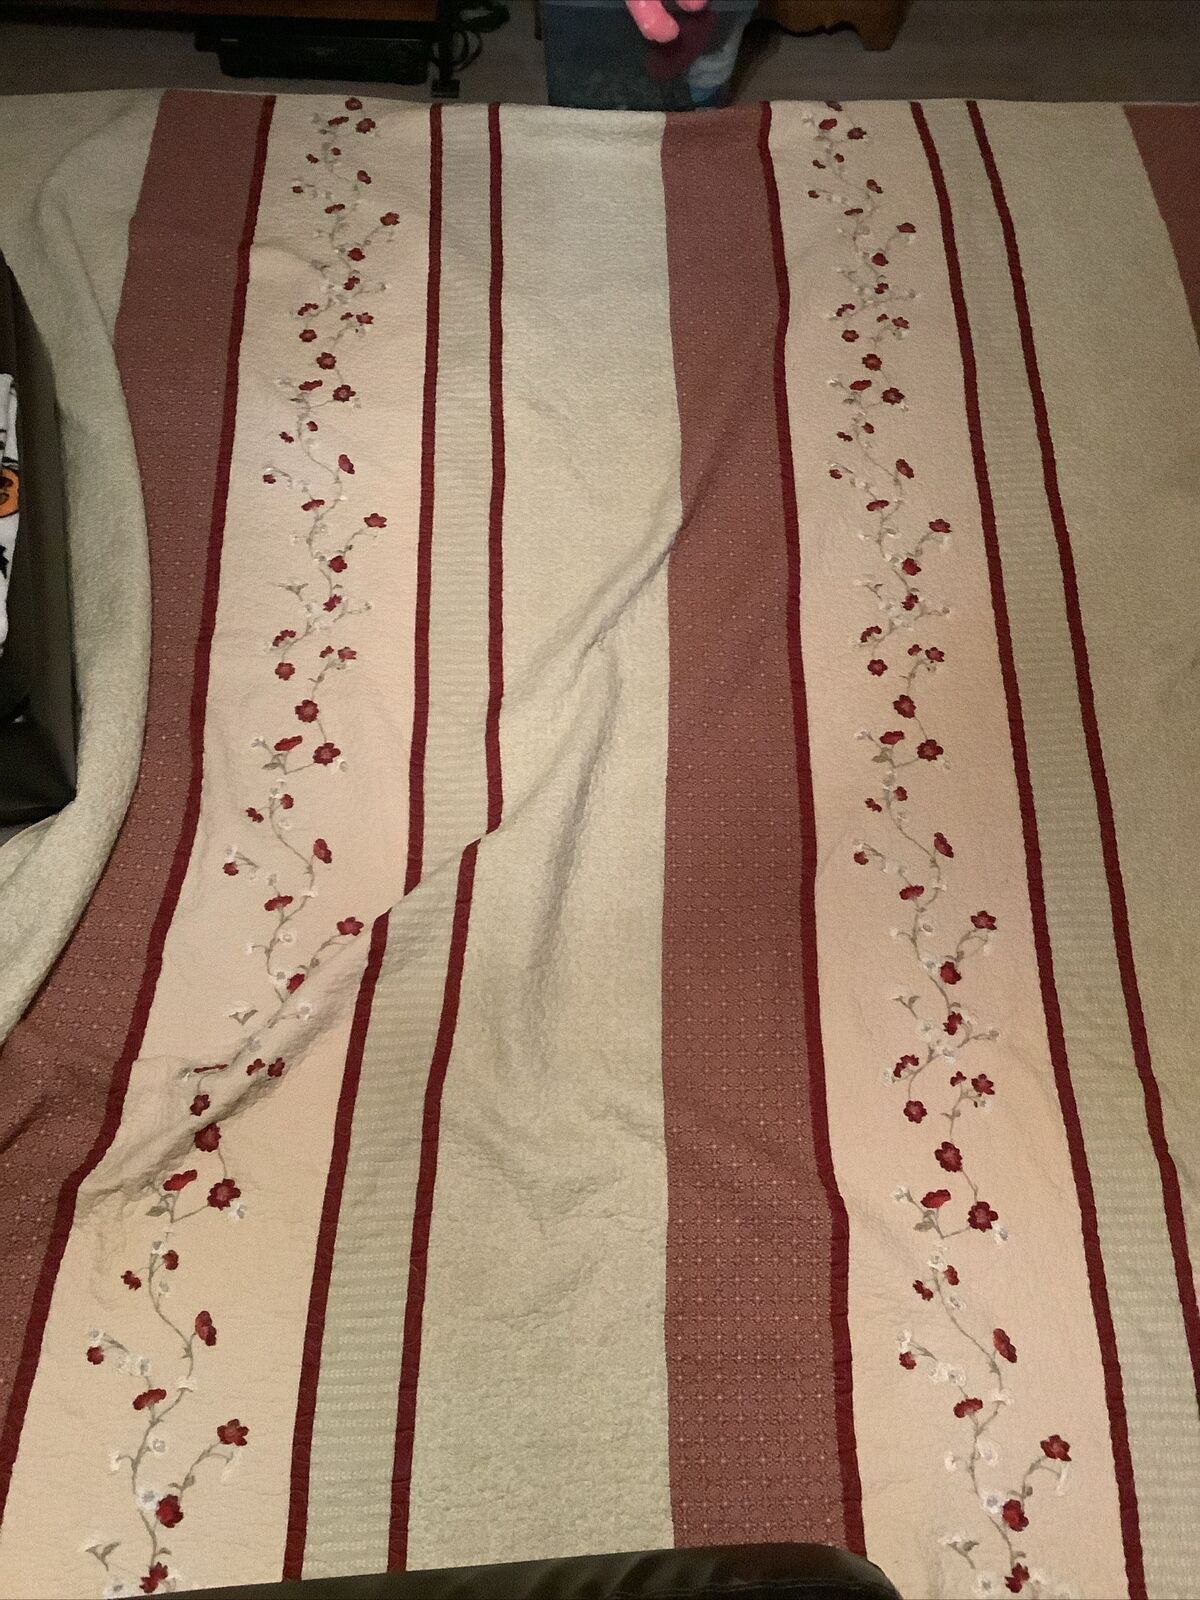 Gorgeous 101 ” X 90” Pottery Barn Quilt W/ Embroidered Flowers 🌺 Ivory/Burgundy